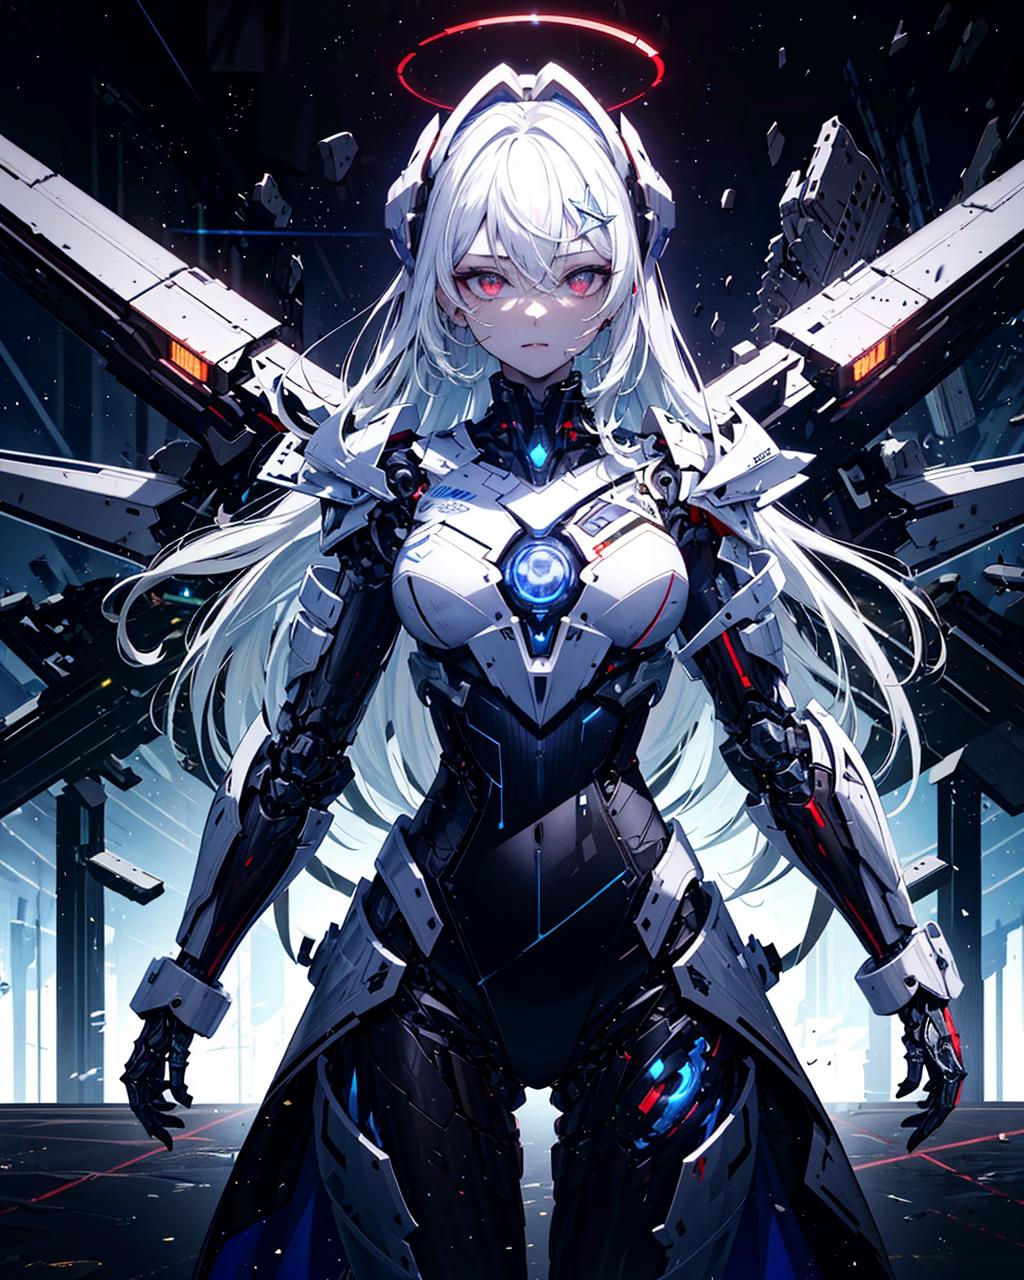 A robotic female character with long blonde hair and red eyes.